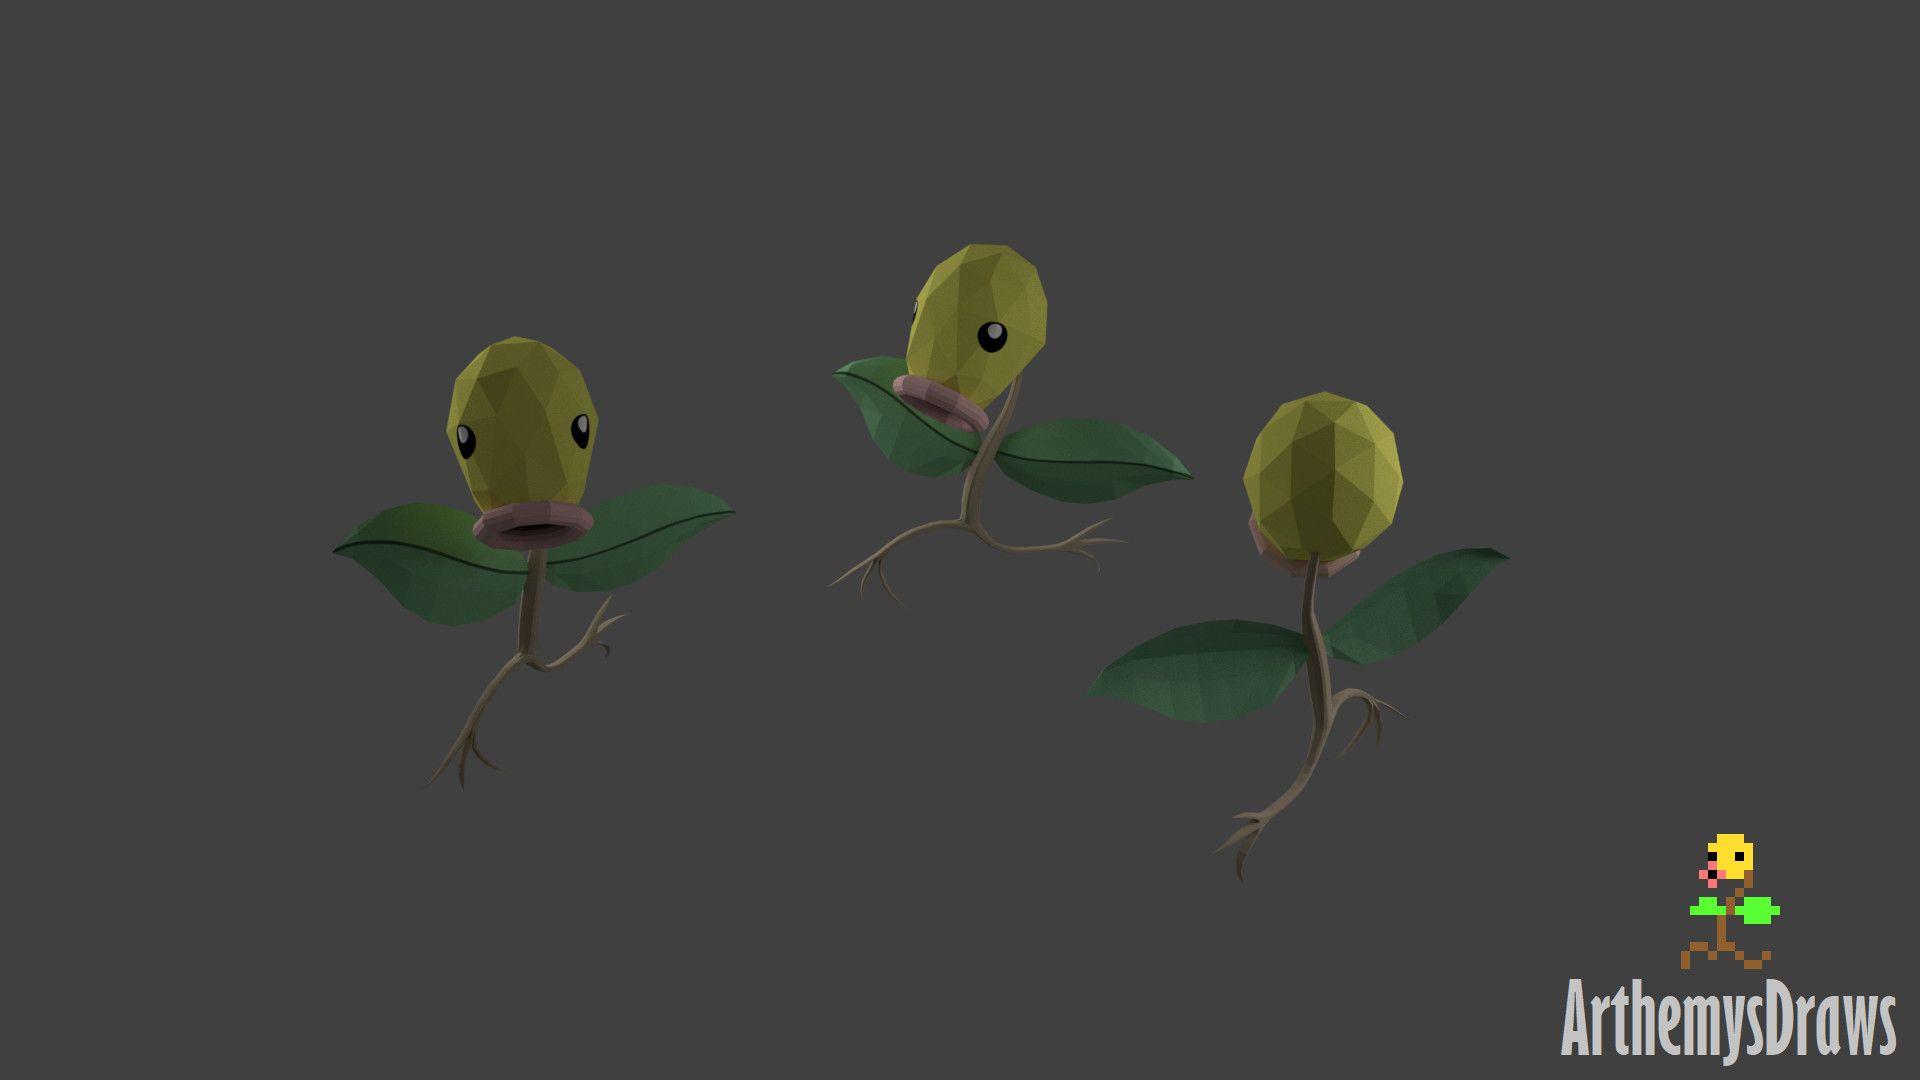 Bellsprout Hd Wallpapers